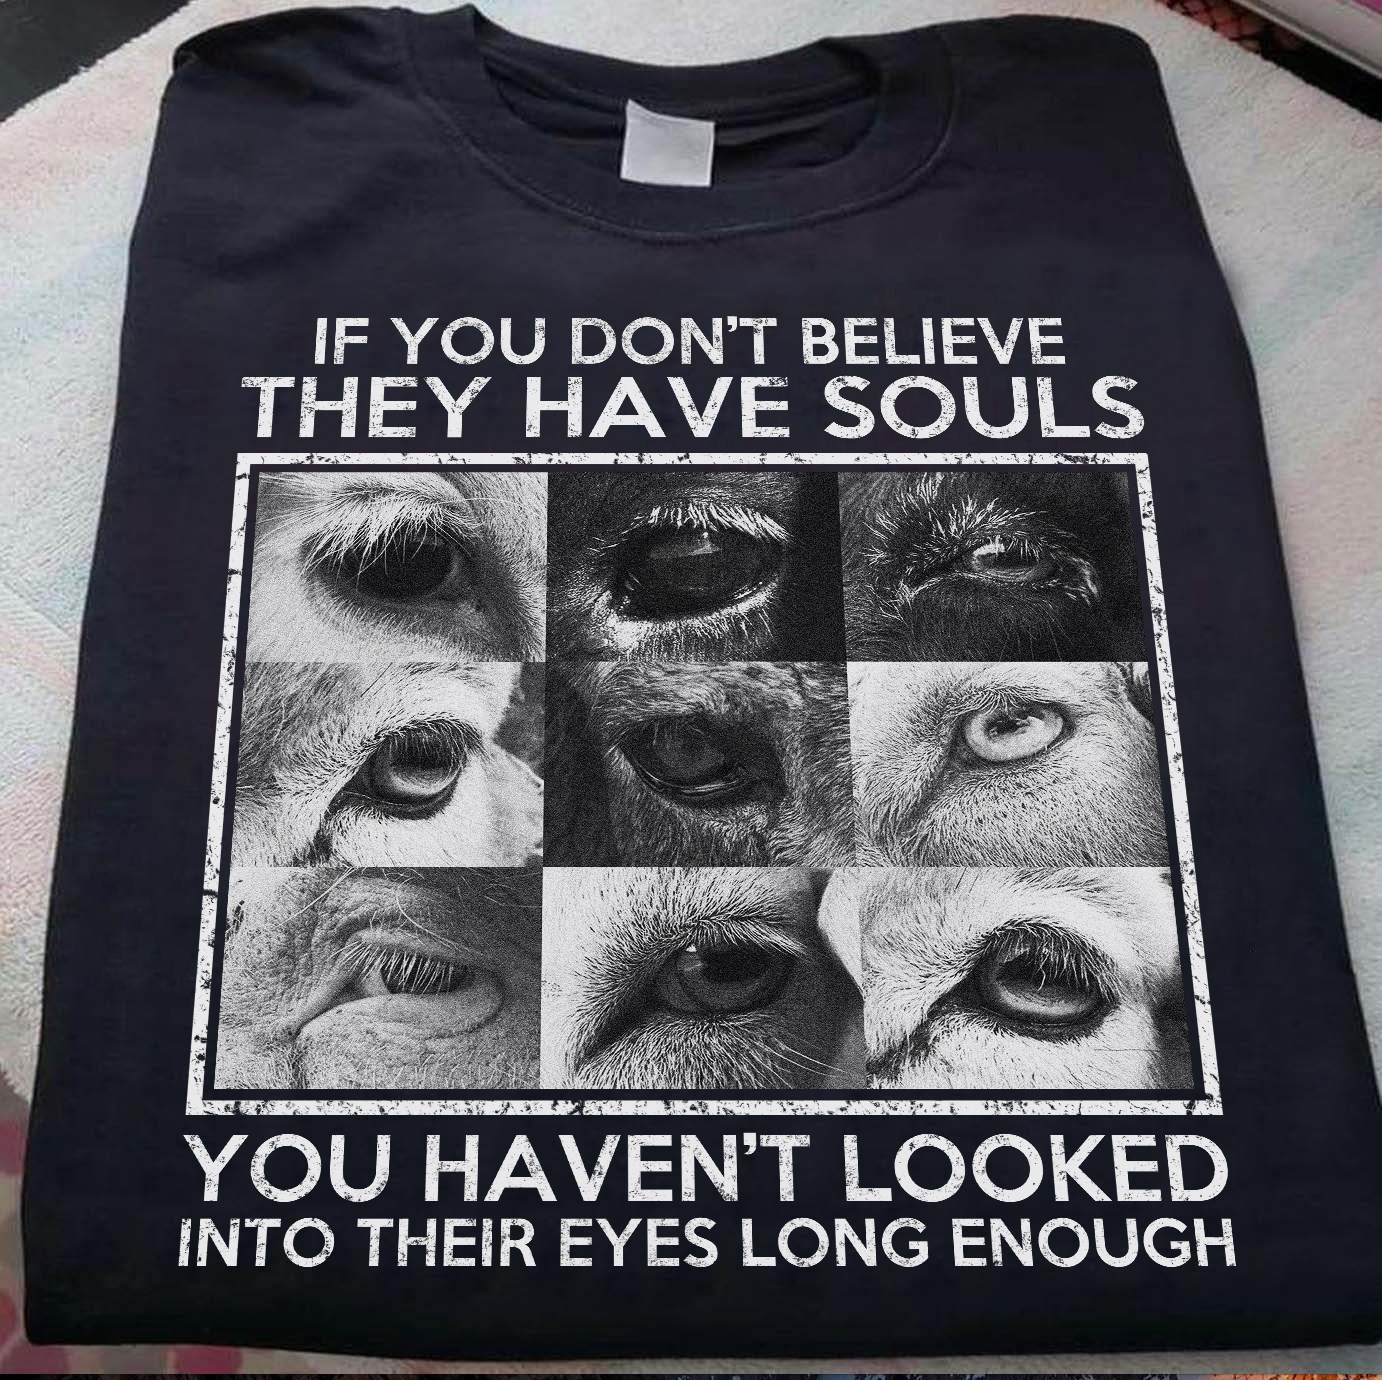 If you don't believe they have souls you haven't looked into their eyes - animal lover